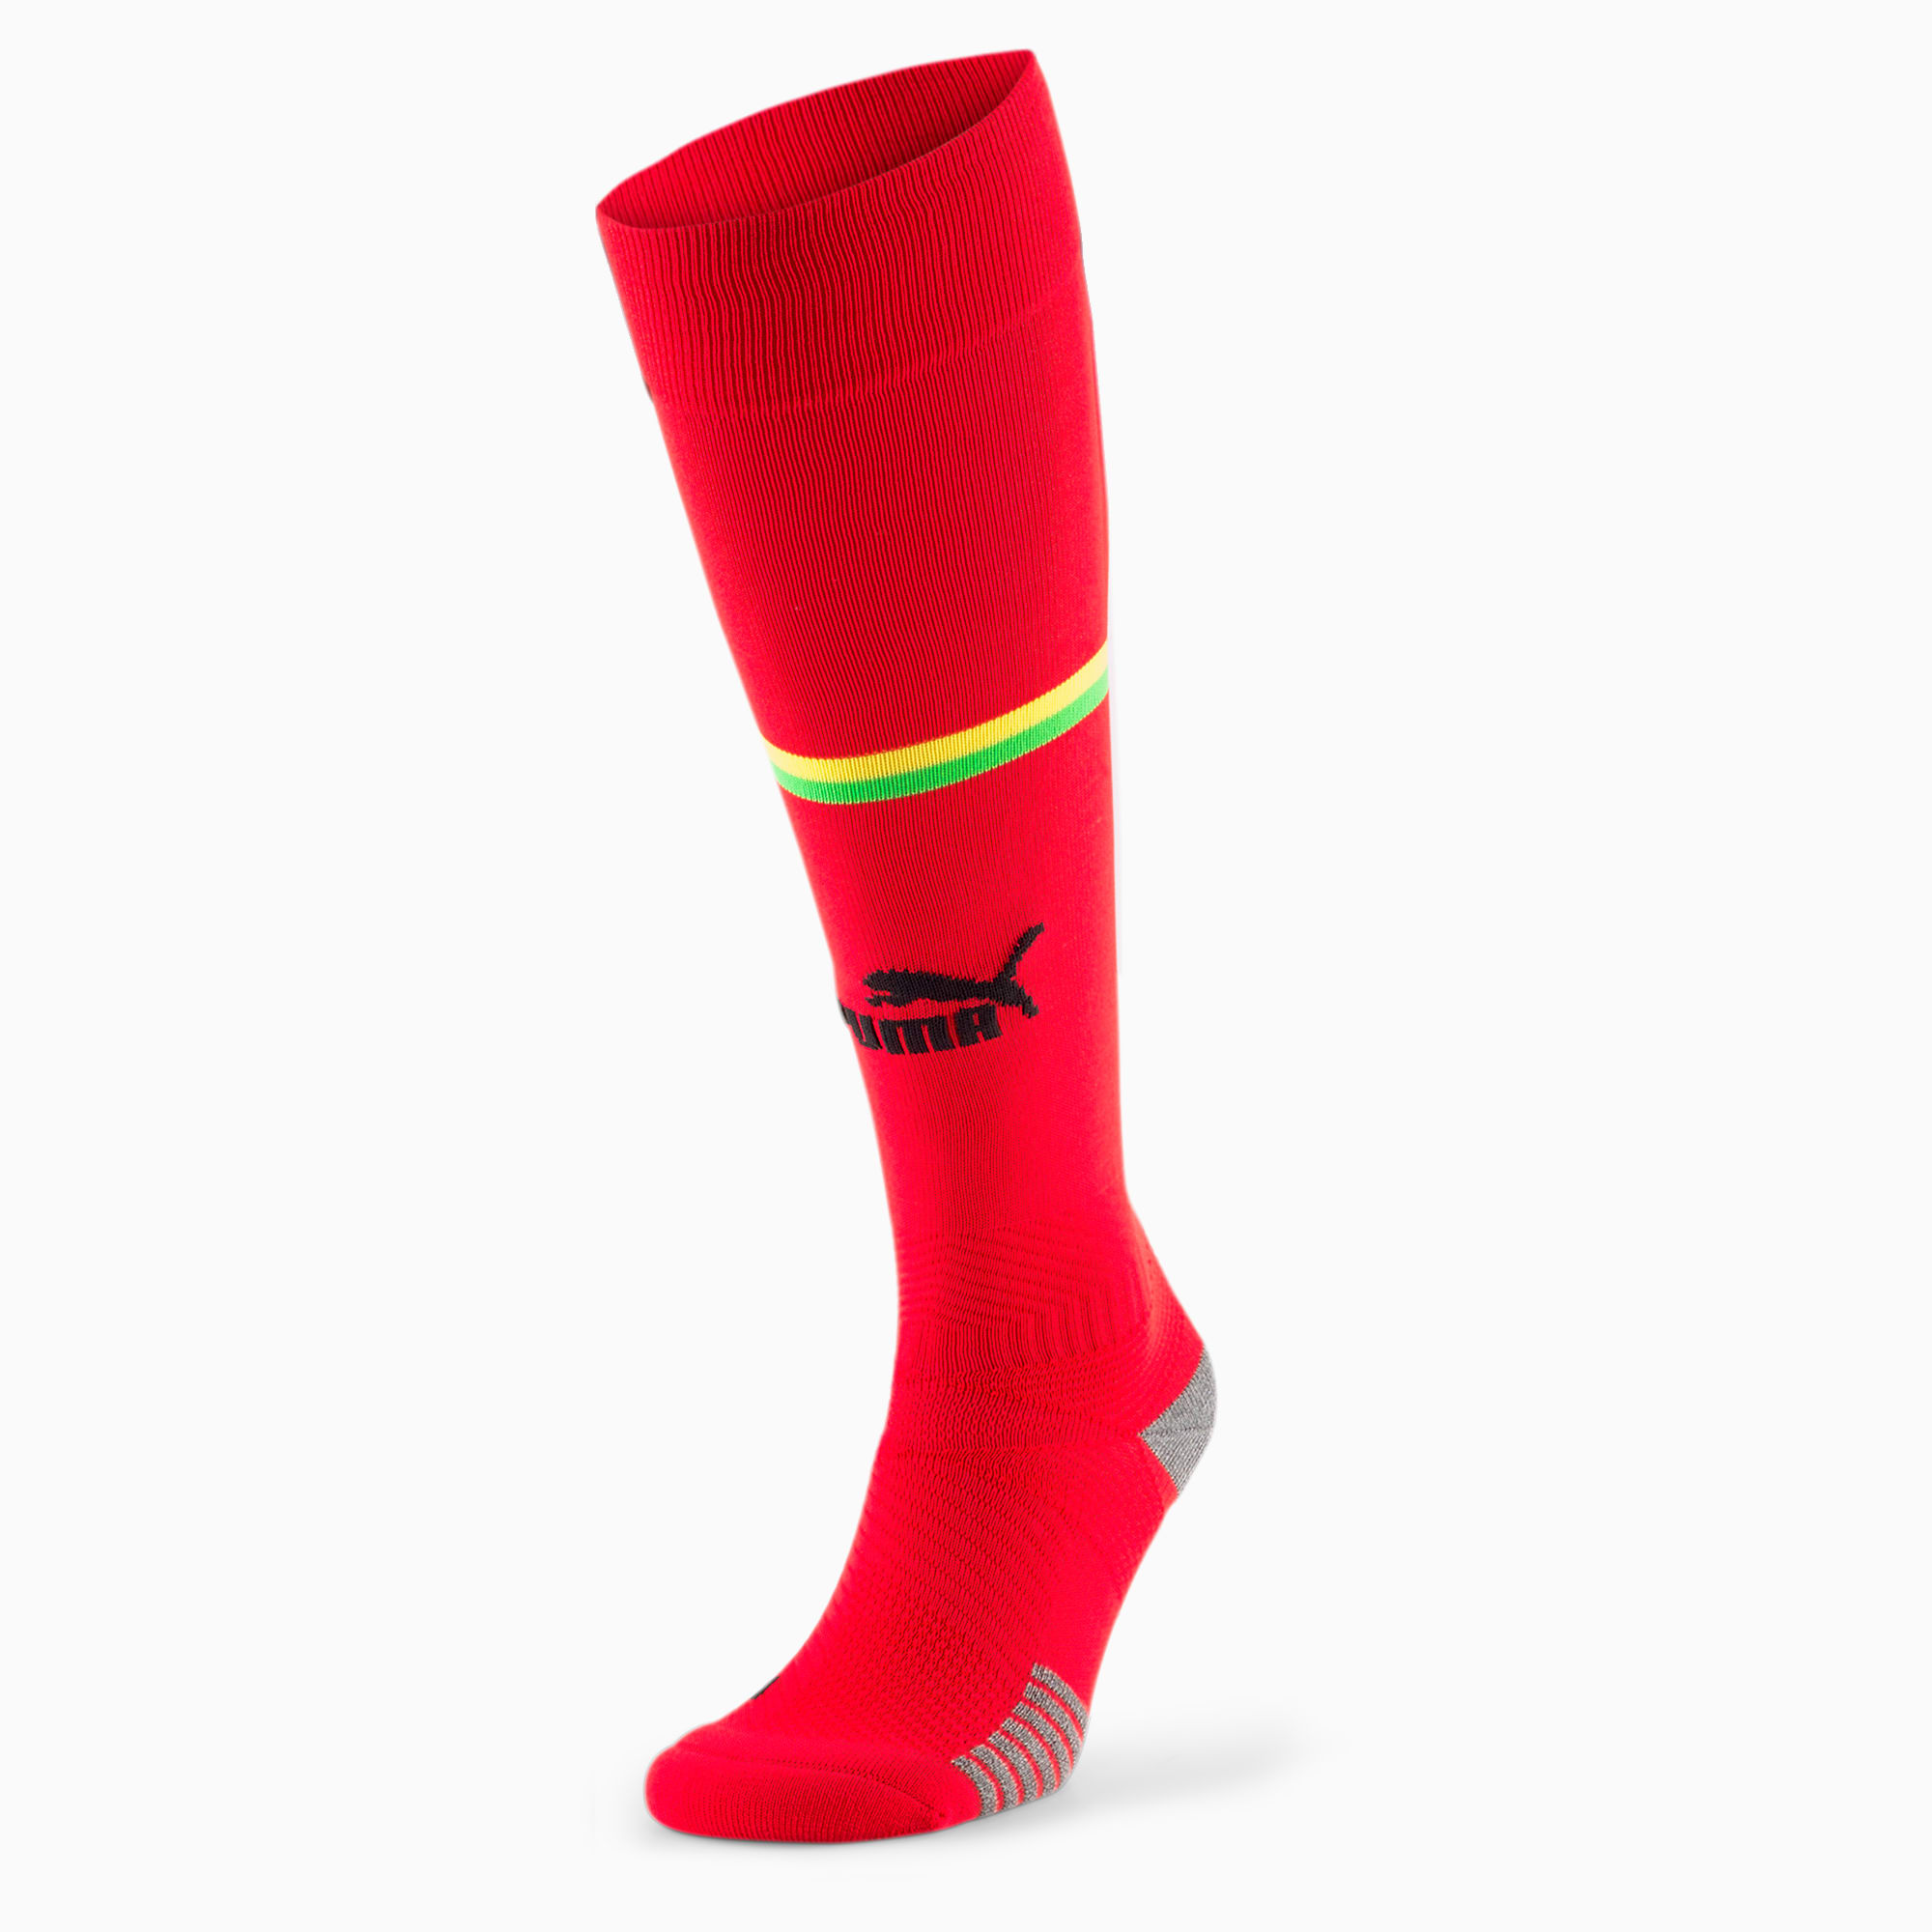 PUMA Chaussettes Ghana Striped Replica Homme, Rouge/Jaune